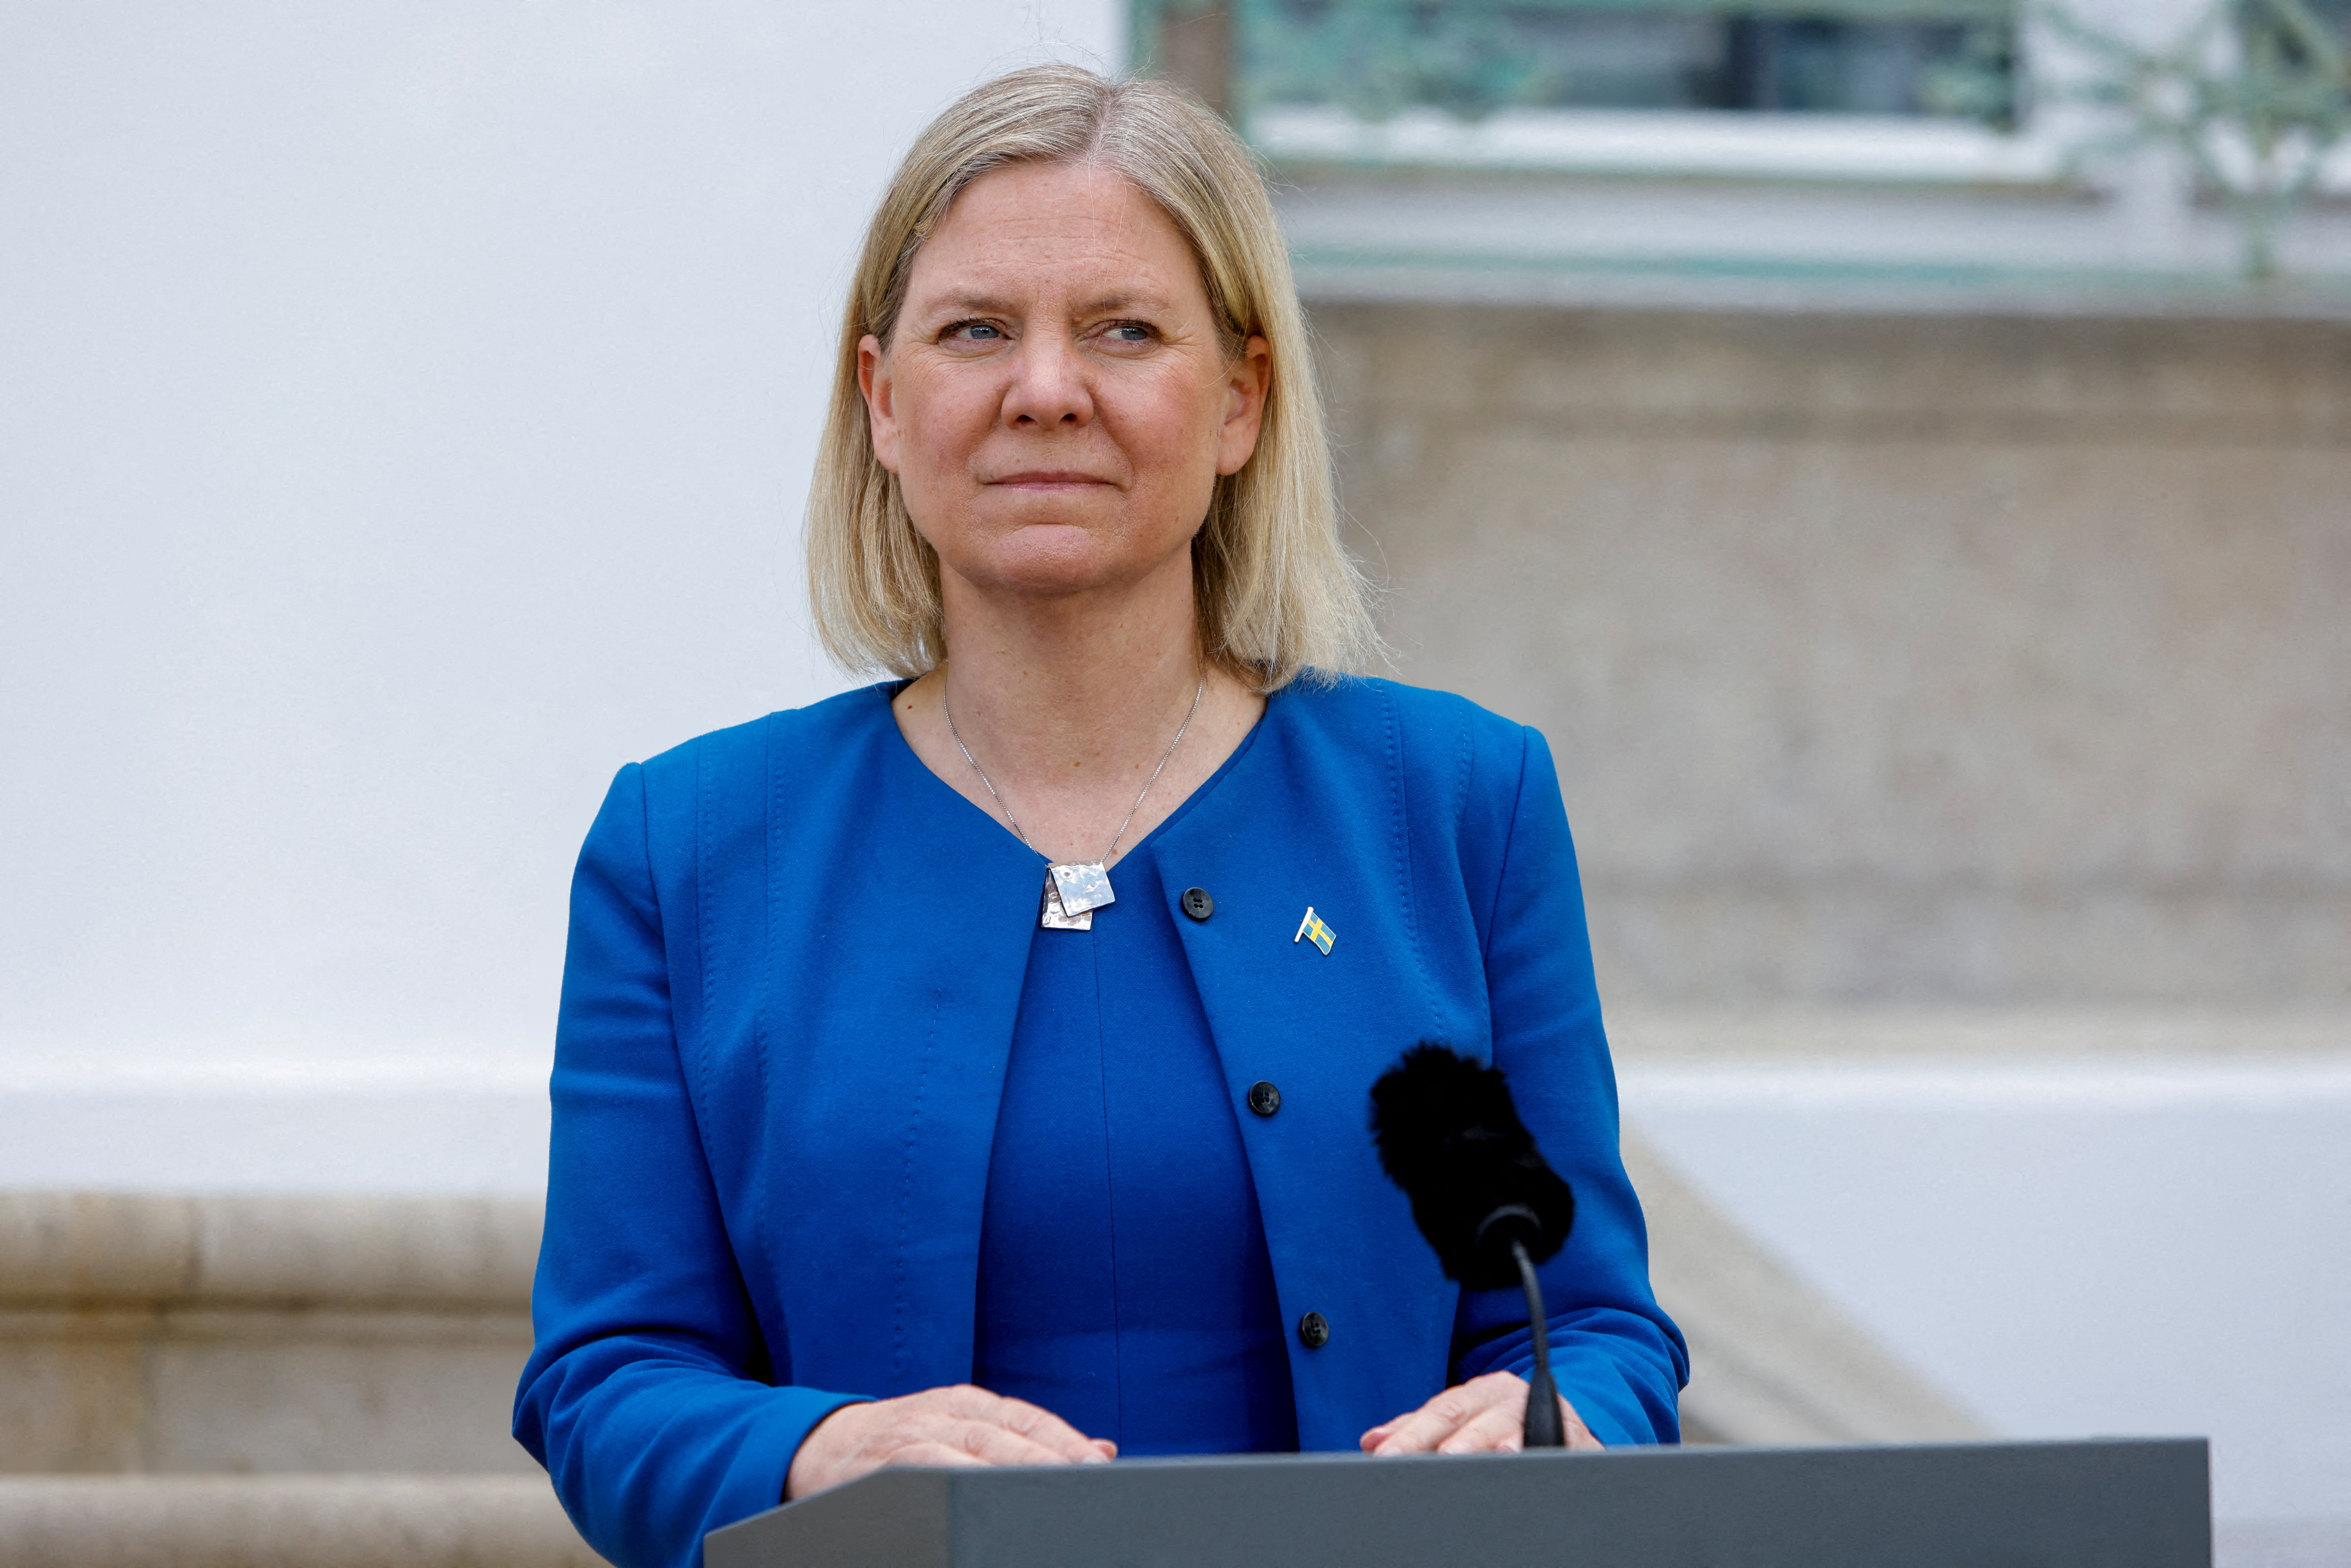 FILE PHOTO: Sweden's Prime Minister Magdalena Andersson looks next to a microphone on the first day of a special German cabinet meeting hosted by Chancellor Olaf Scholz at the government guest house Schloss Meseberg in Meseberg, Gransee, Germany , May 3, 2022 (Reuters)